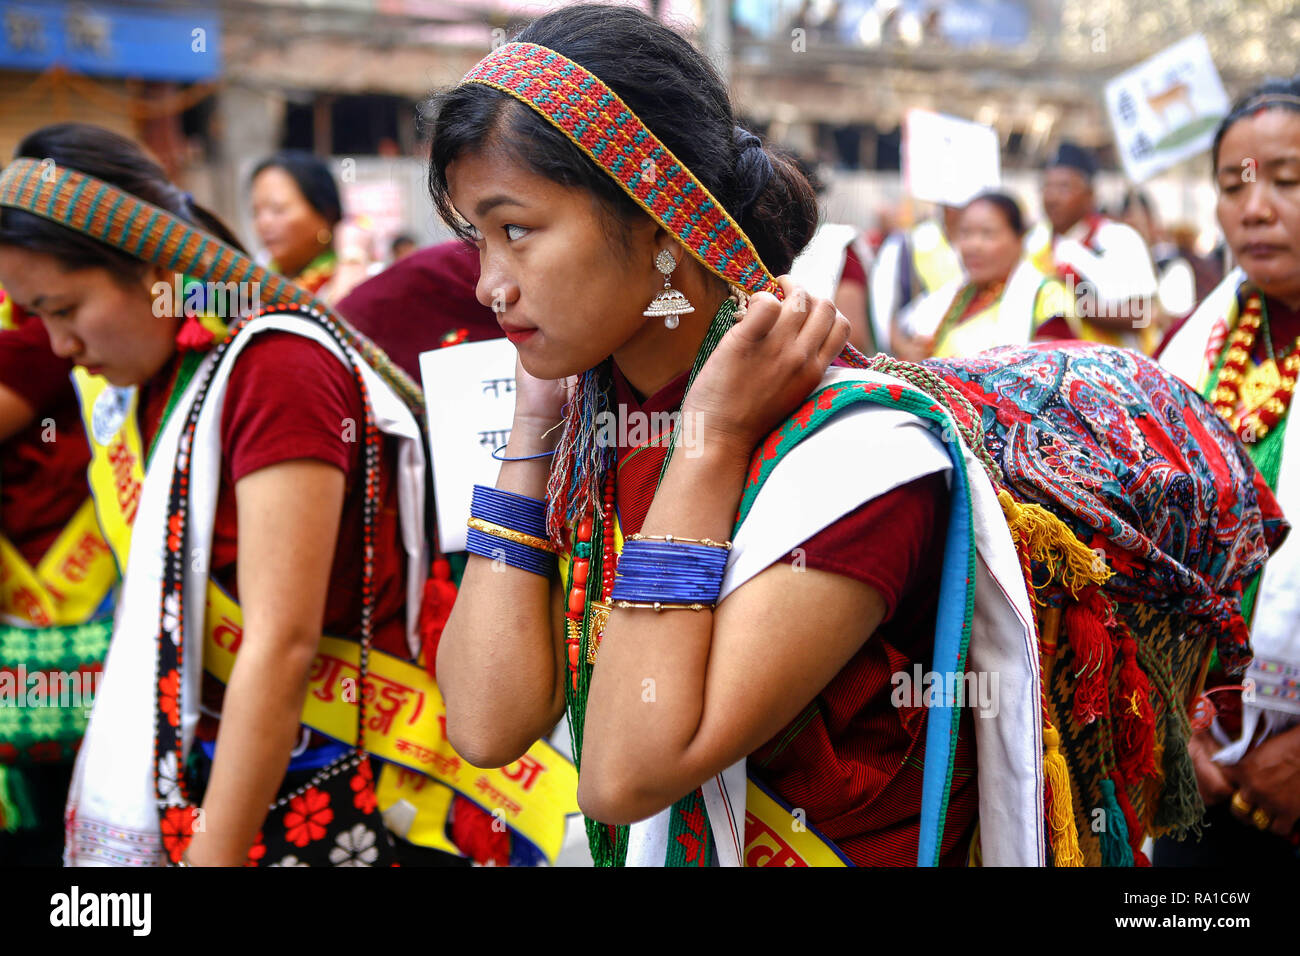 Nepalese women from ethnic Gurung community in traditional attire take part in parade to mark their New Year also known as Tamu Losar. The indigenous Gurungs, also known as Tamu, are celebrating the advent of the year of the deer. Stock Photo